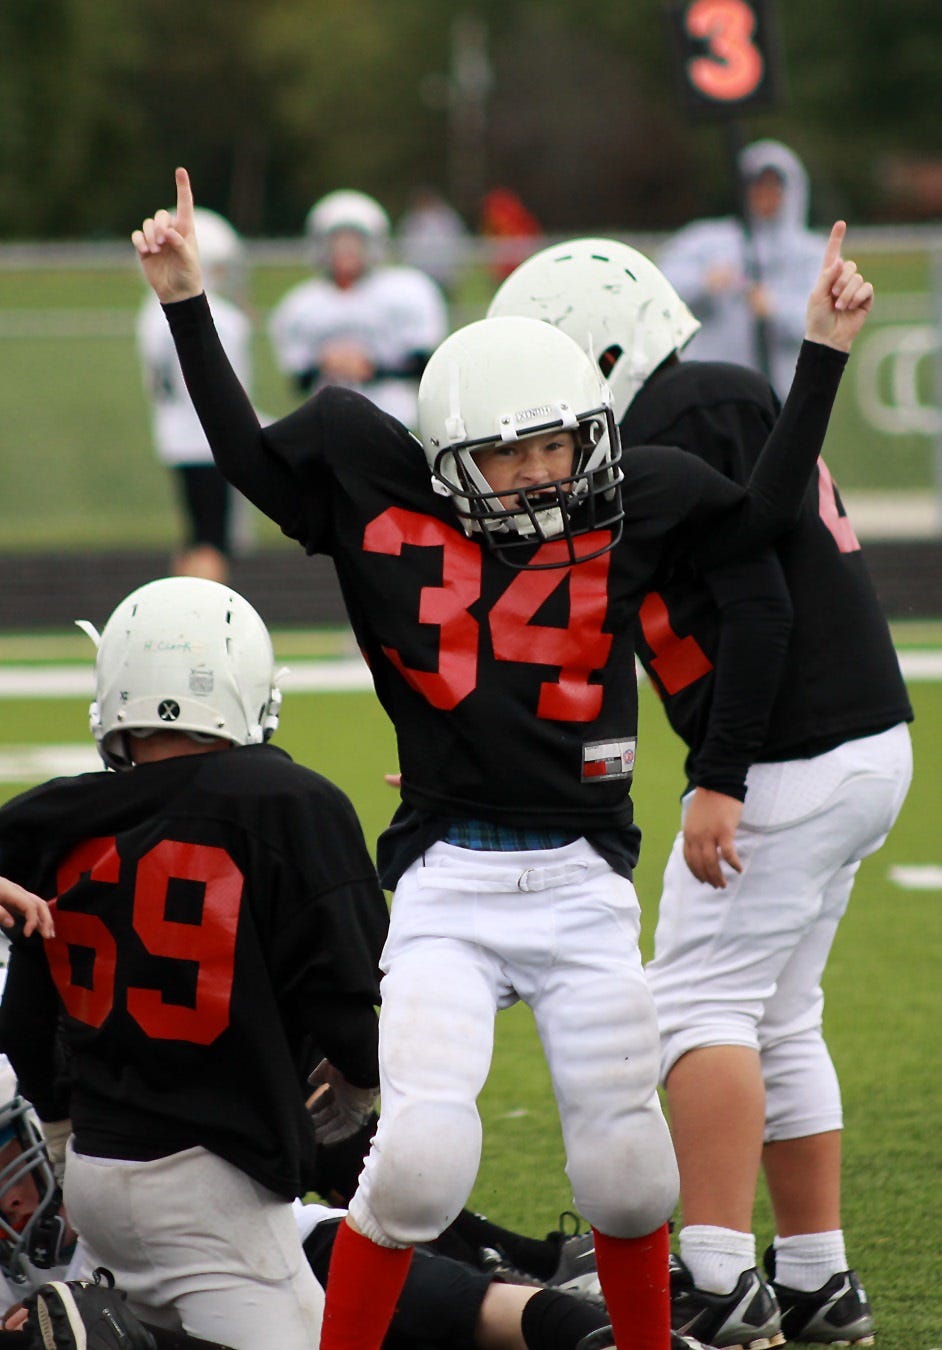 Triumph and heartbreak are consistent themes in any sport. But, the feelings concentrated when kids are playing. In this photo, a young football player reacts to his own good effort, and he looks to his parents in the stands for validation. 